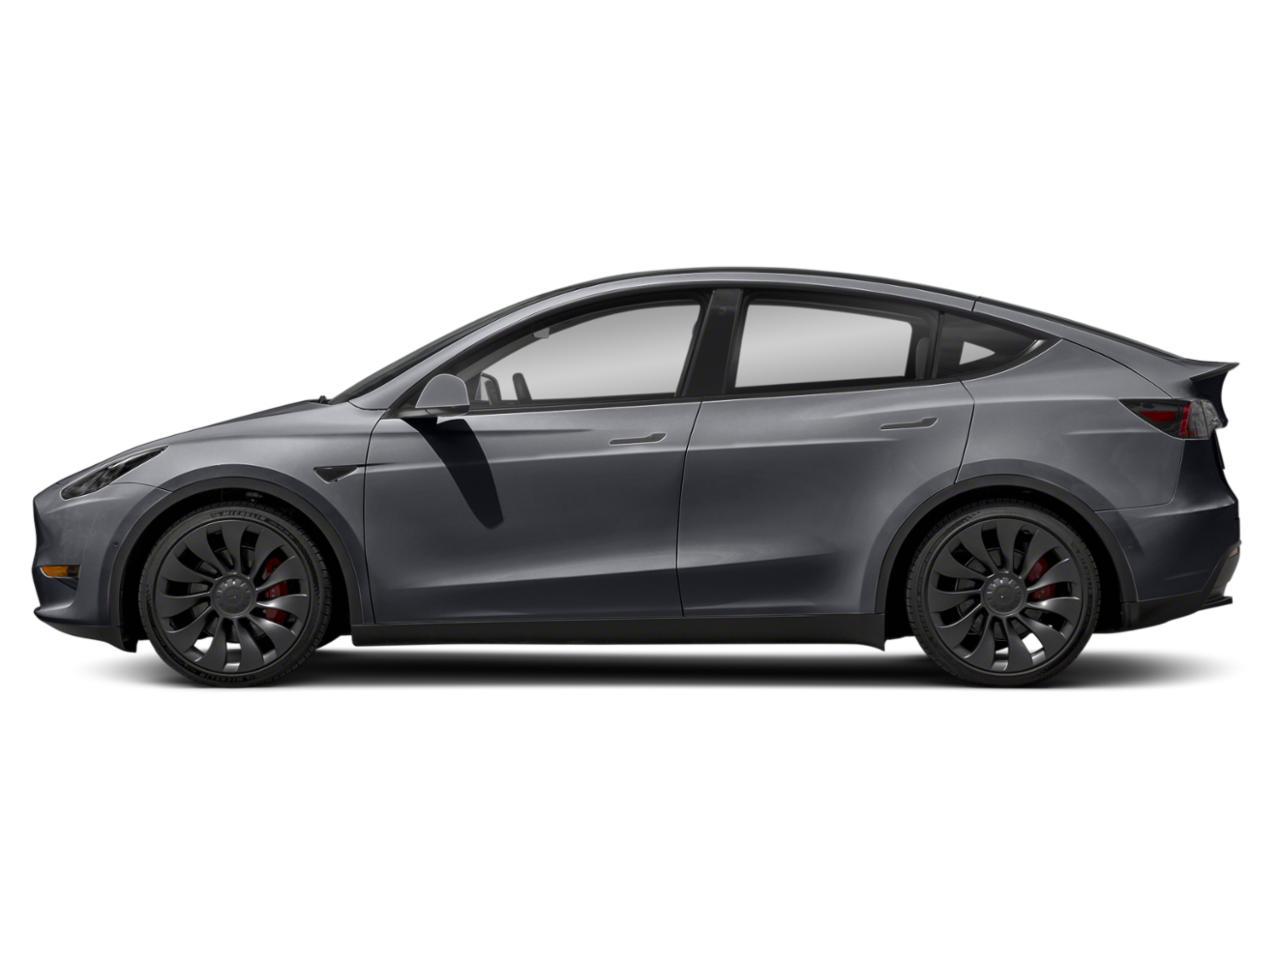 Used 2022 Tesla Model Y Long Range with VIN 7SAYGDEEXNF386111 for sale in McMinnville, OR